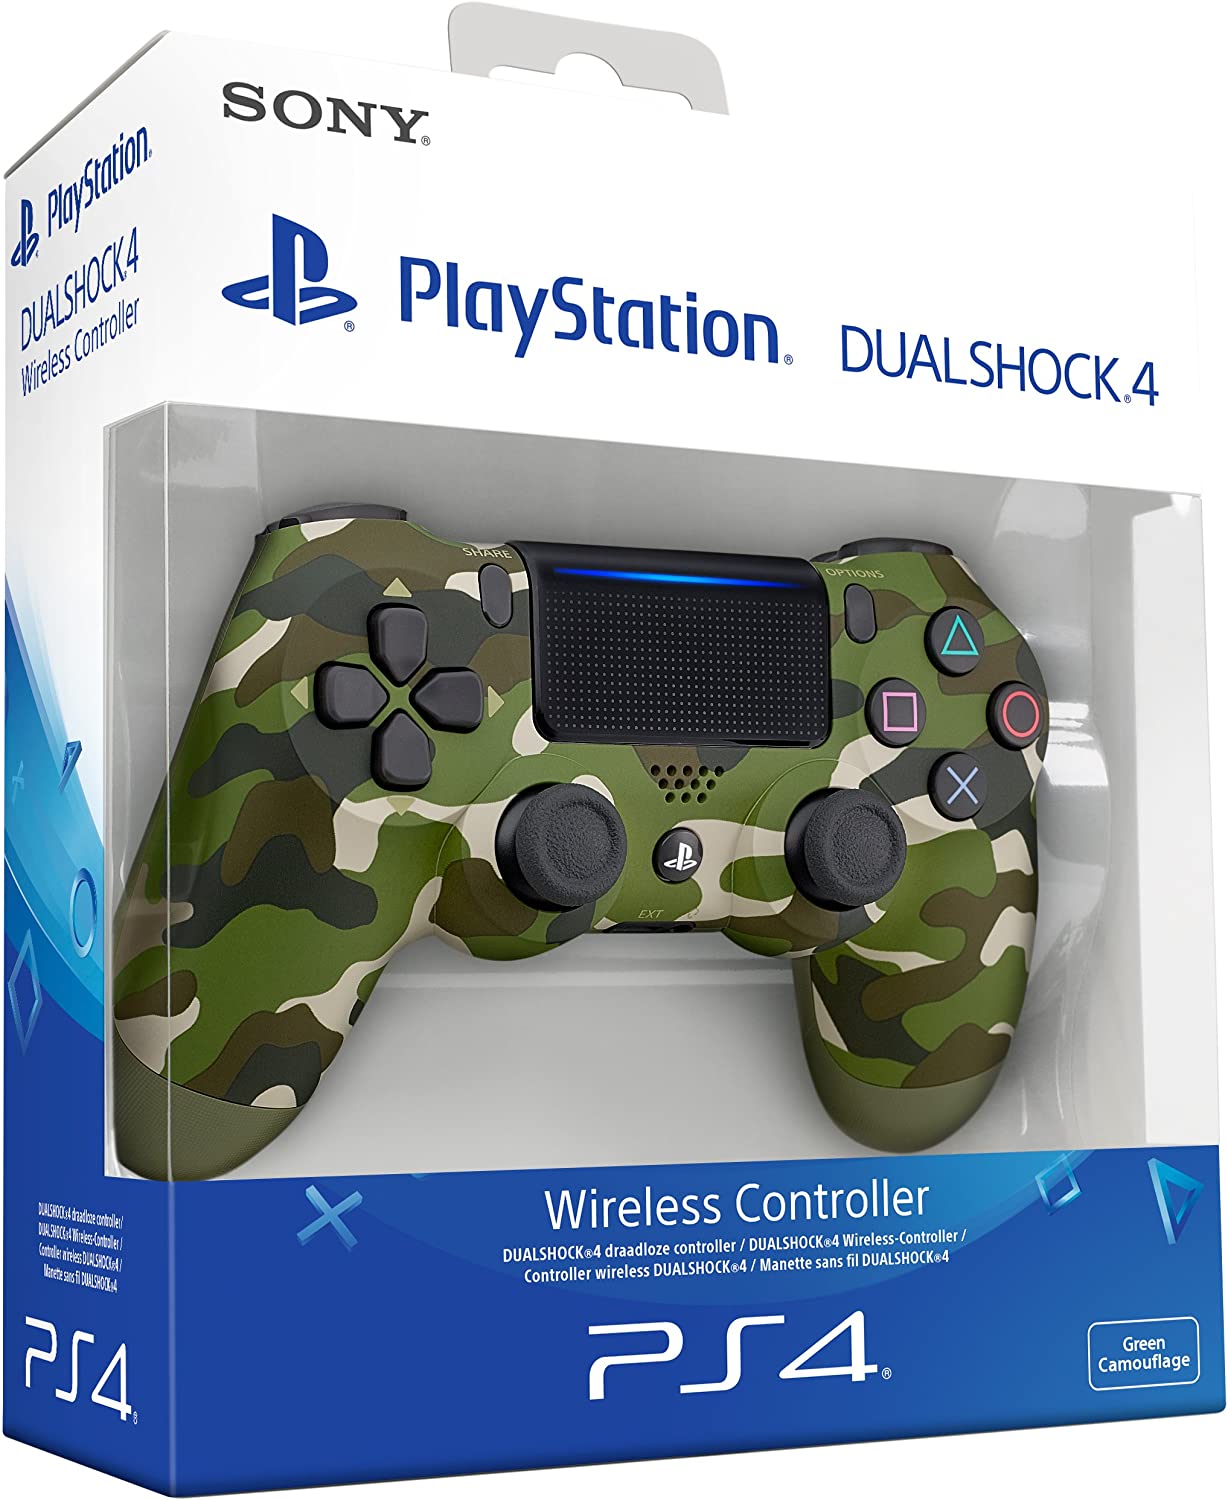 Dualshock 4 Wireless Controller for Playstation 4 PS4 - Green Camo V2 (New)